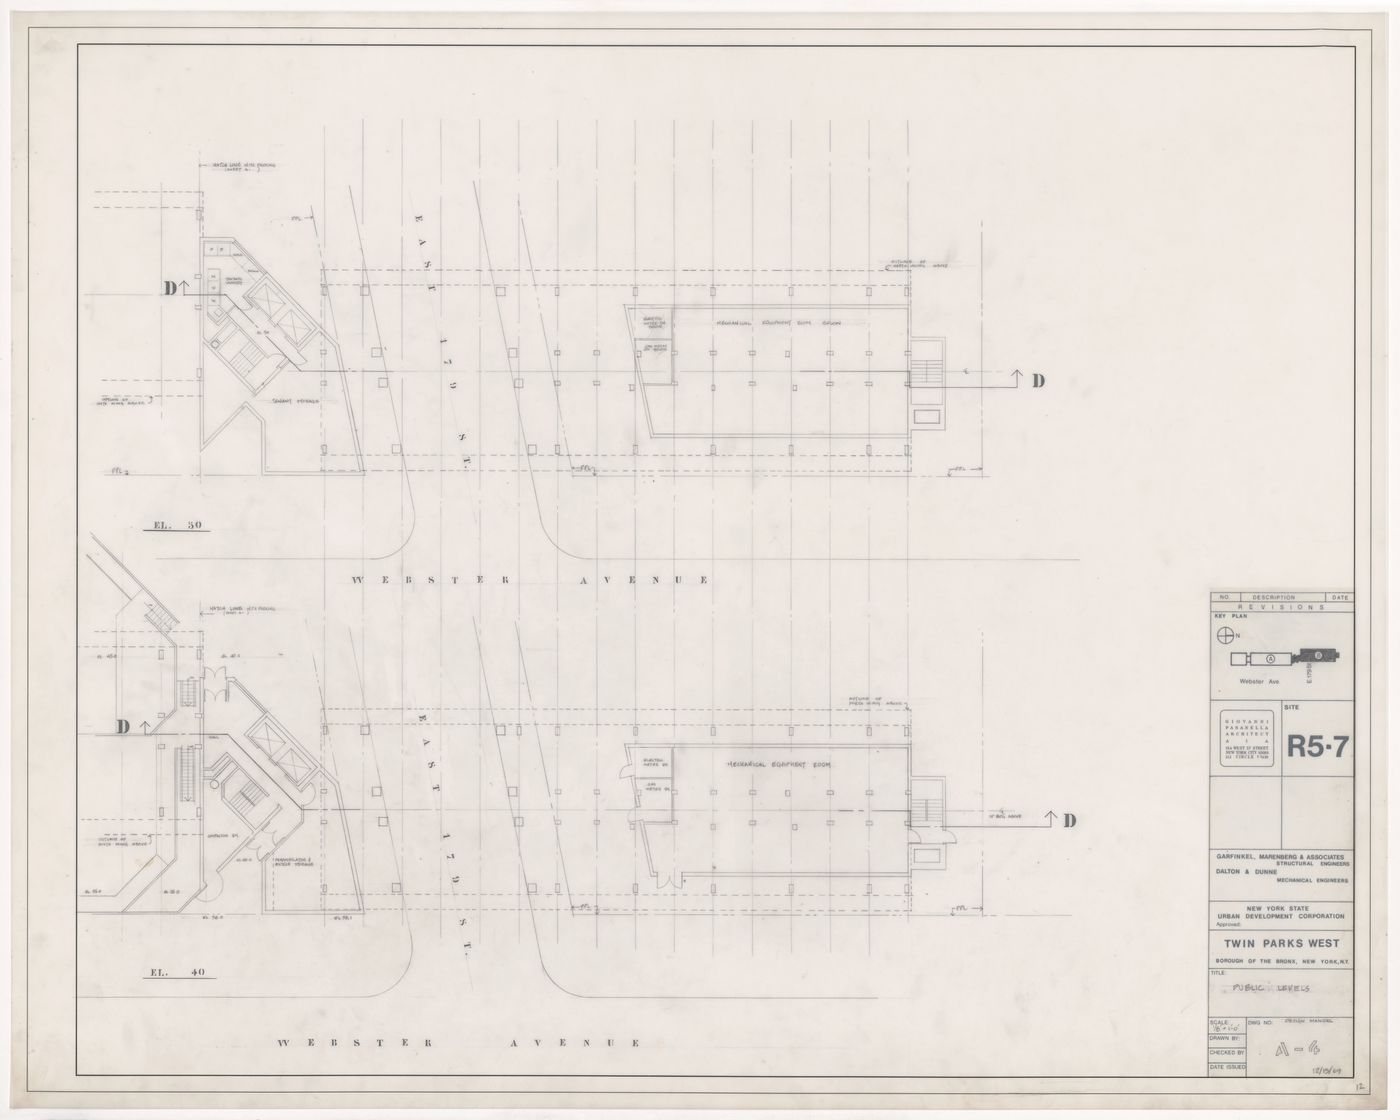 Plans of public levels for Twin Parks West, Site R5-7, Bronx, New York